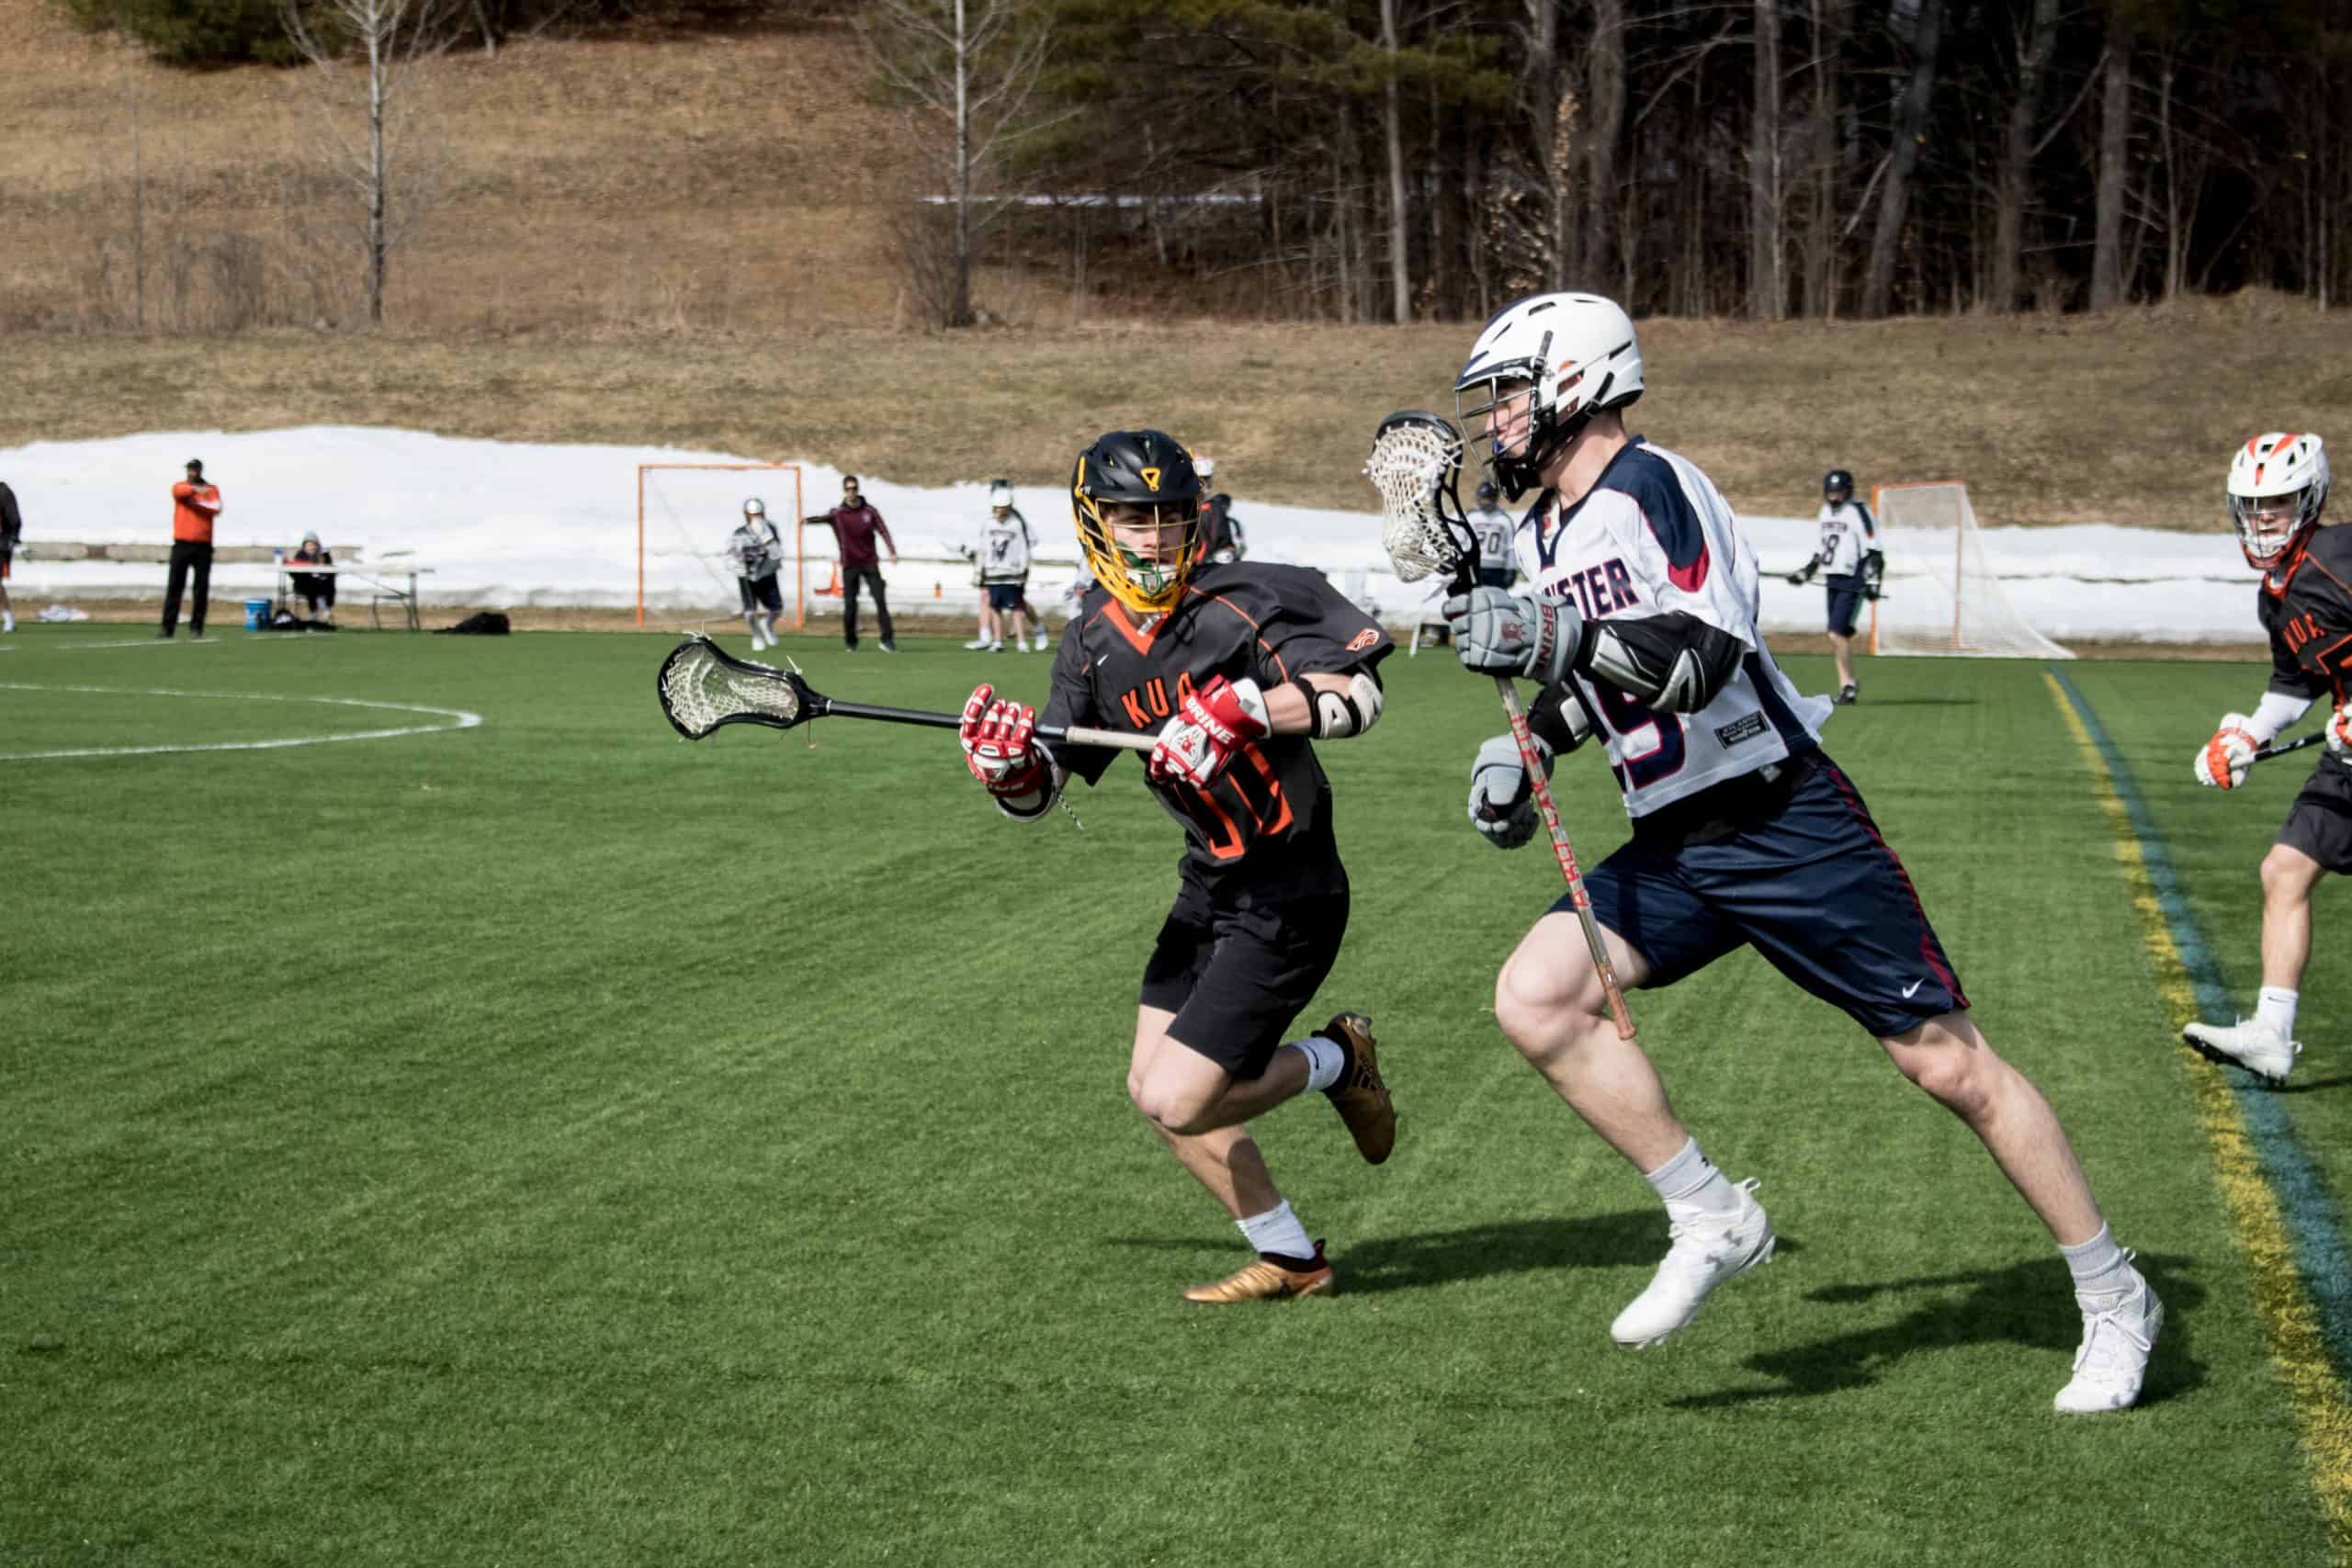 Image of lacrosse players in a game